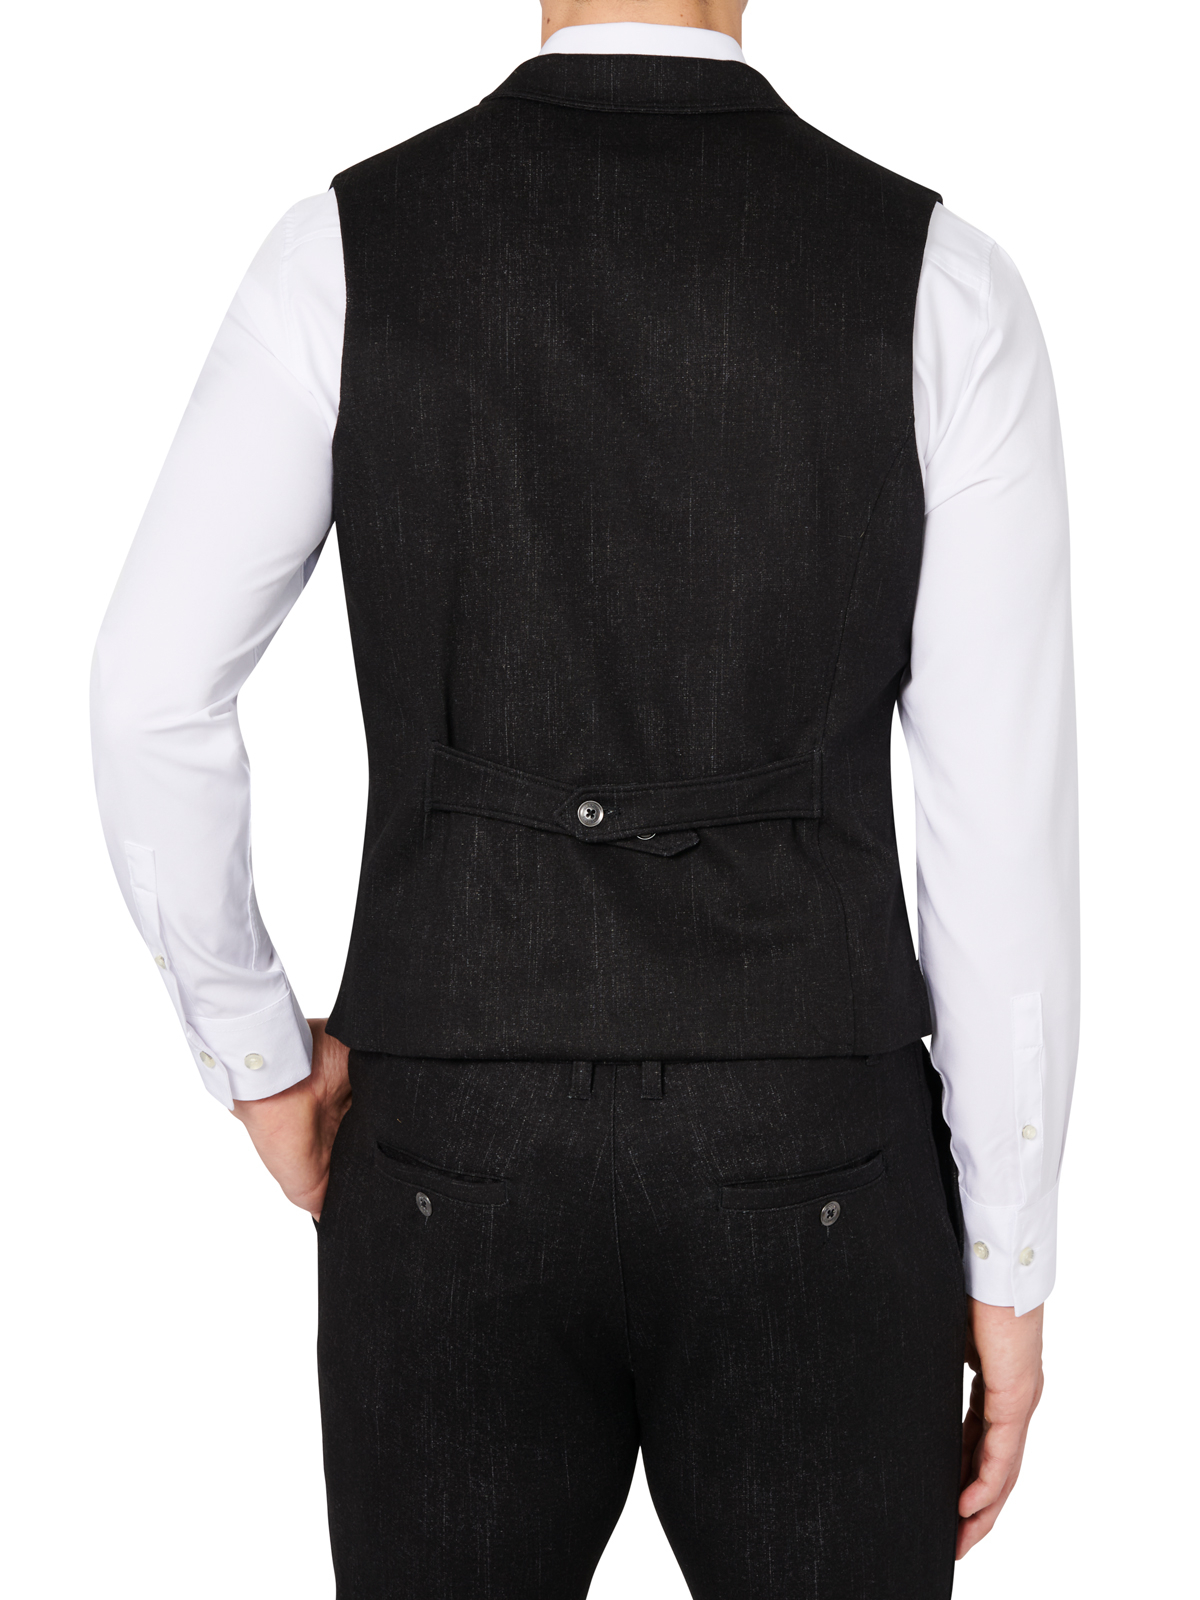 NON SOLID SOLID KNIT VEST